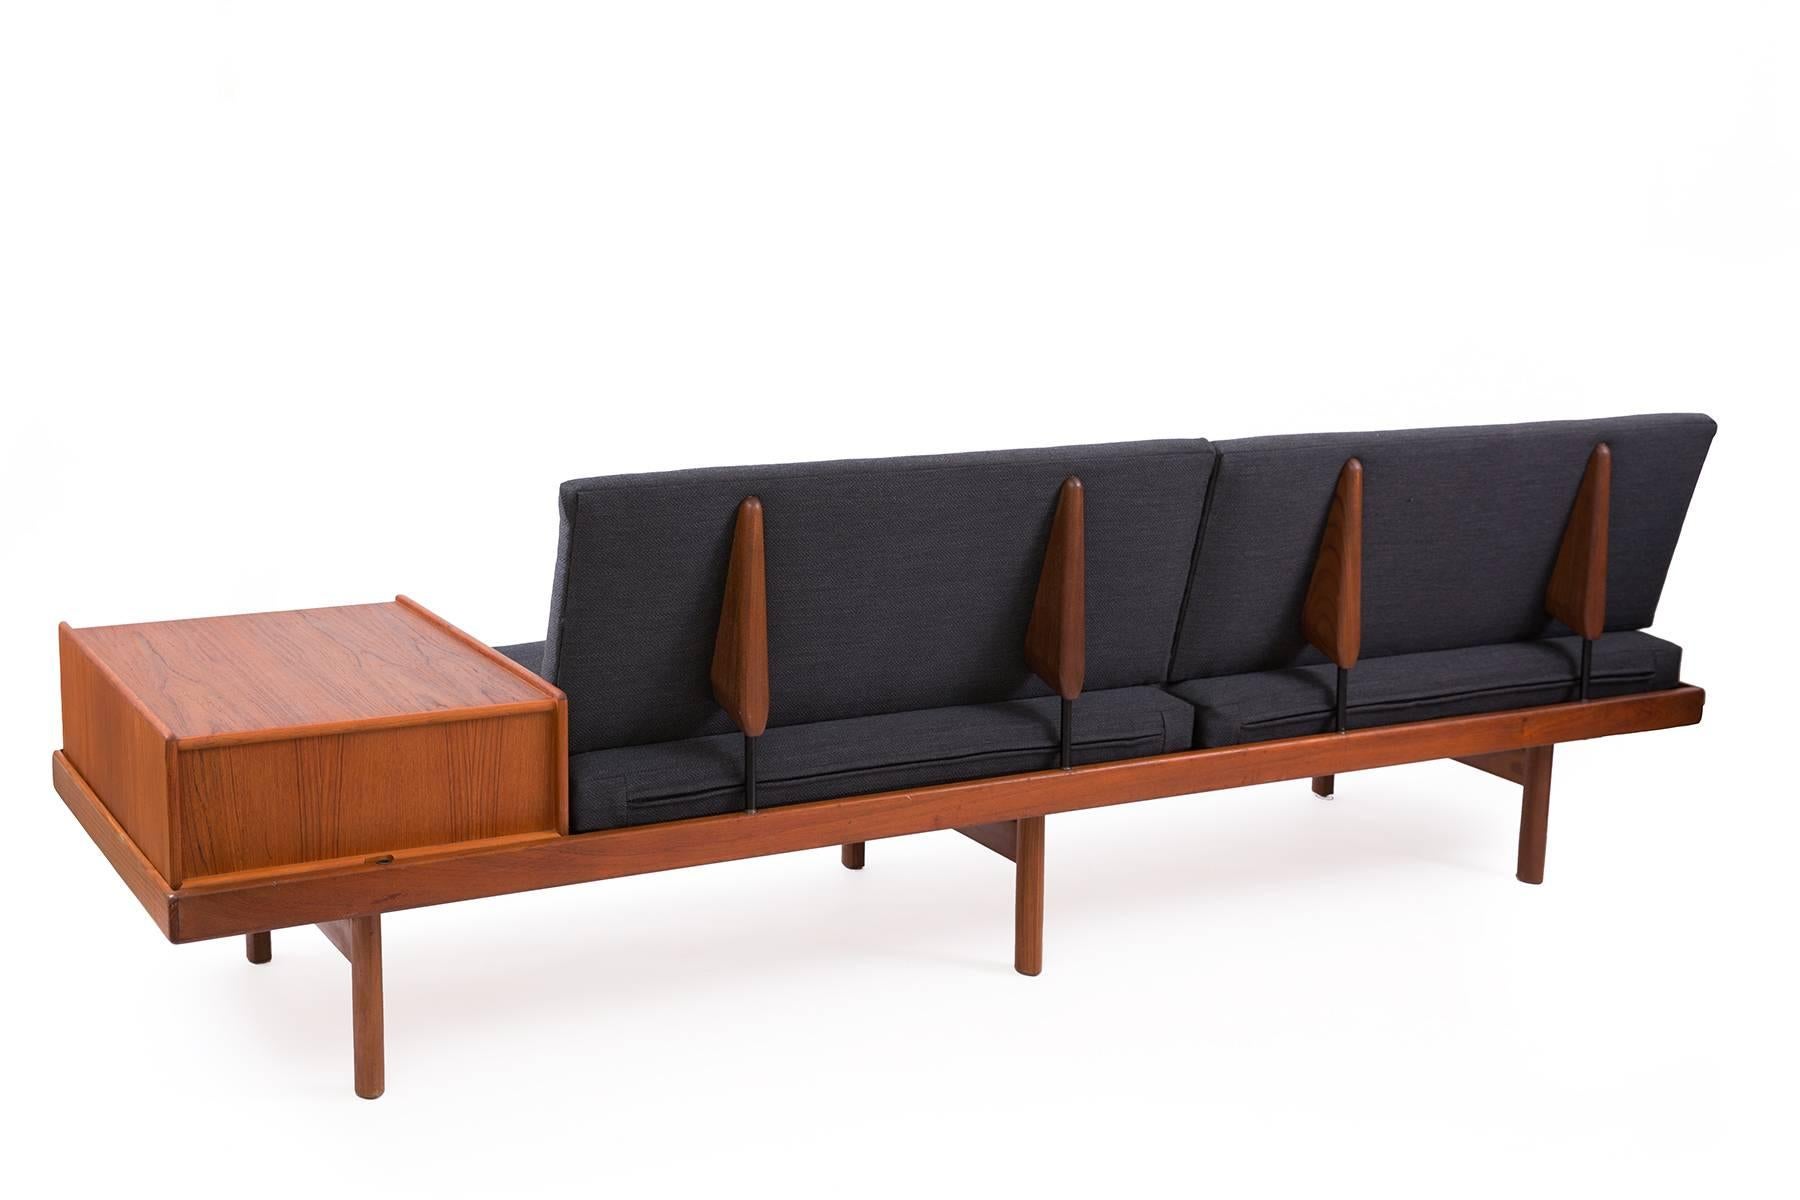 Karl Sorlie and Sonner Sarpsbord modular sofa circa early 1960s from Norway. This versatile example has been newly upholstered and can be arranged in a few different configurations. The back detailing is exceptional.